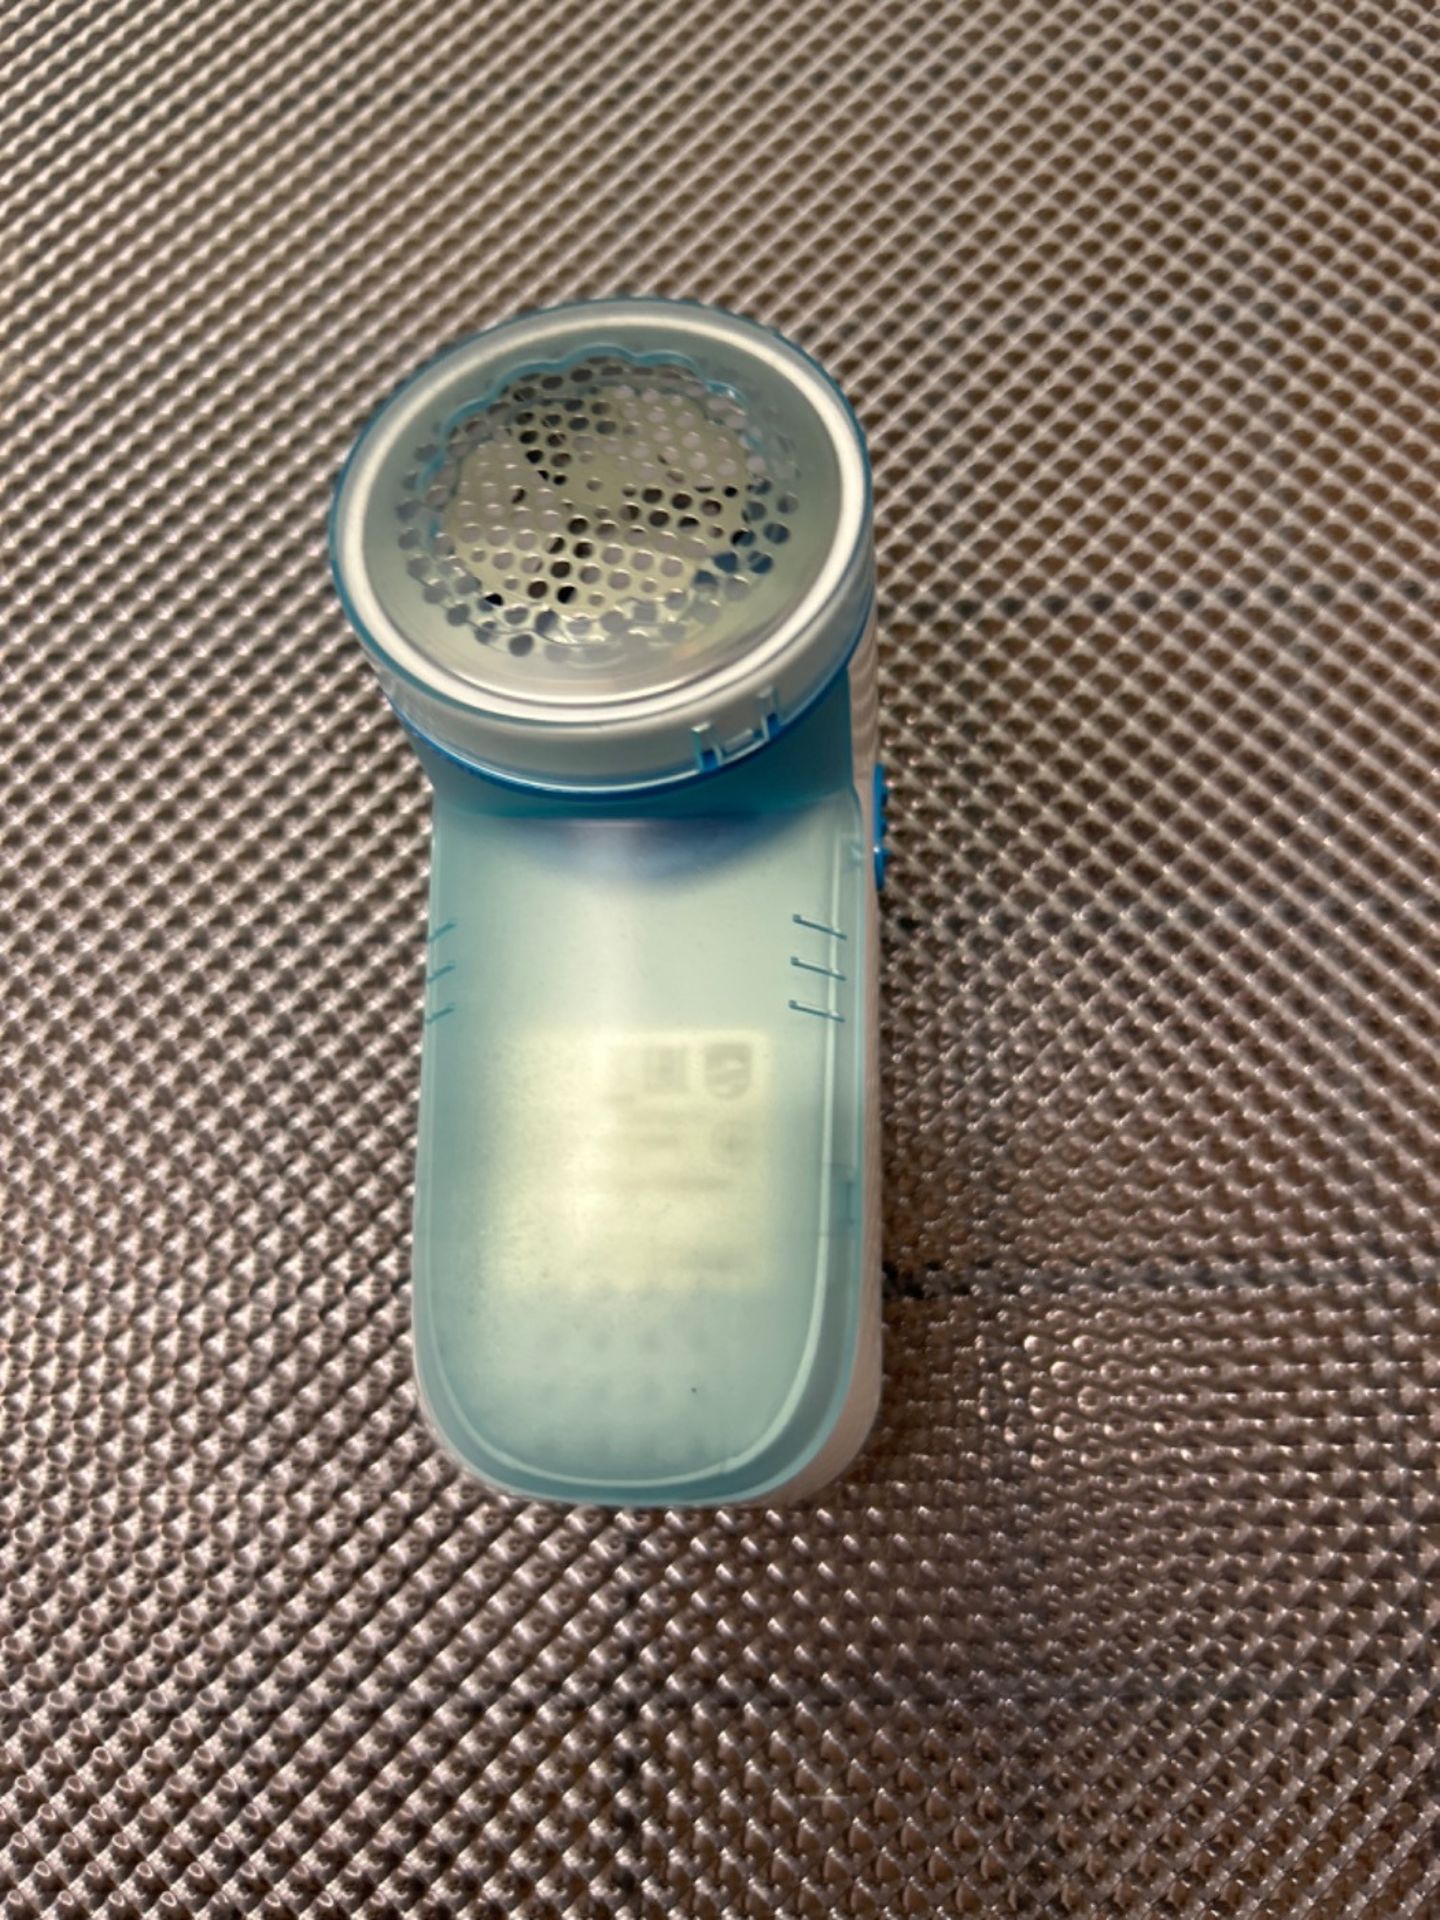 Philips Fabric Shaver GC026/00, Blue - Image 3 of 3